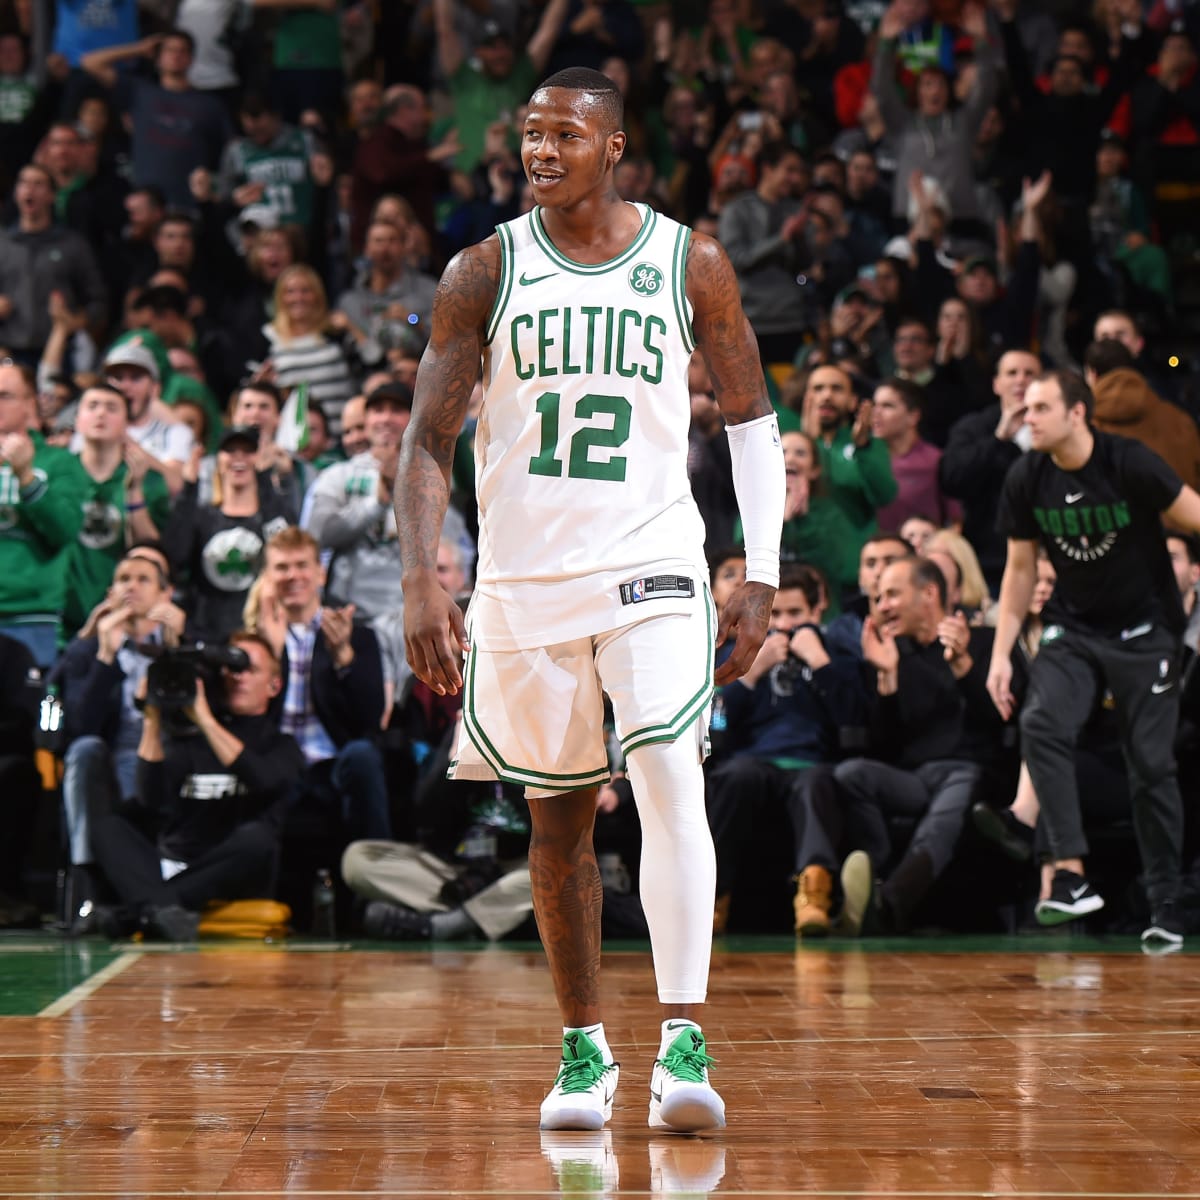 Rozier: Adidas terminated Celtcs G deal for Nike Sports Illustrated